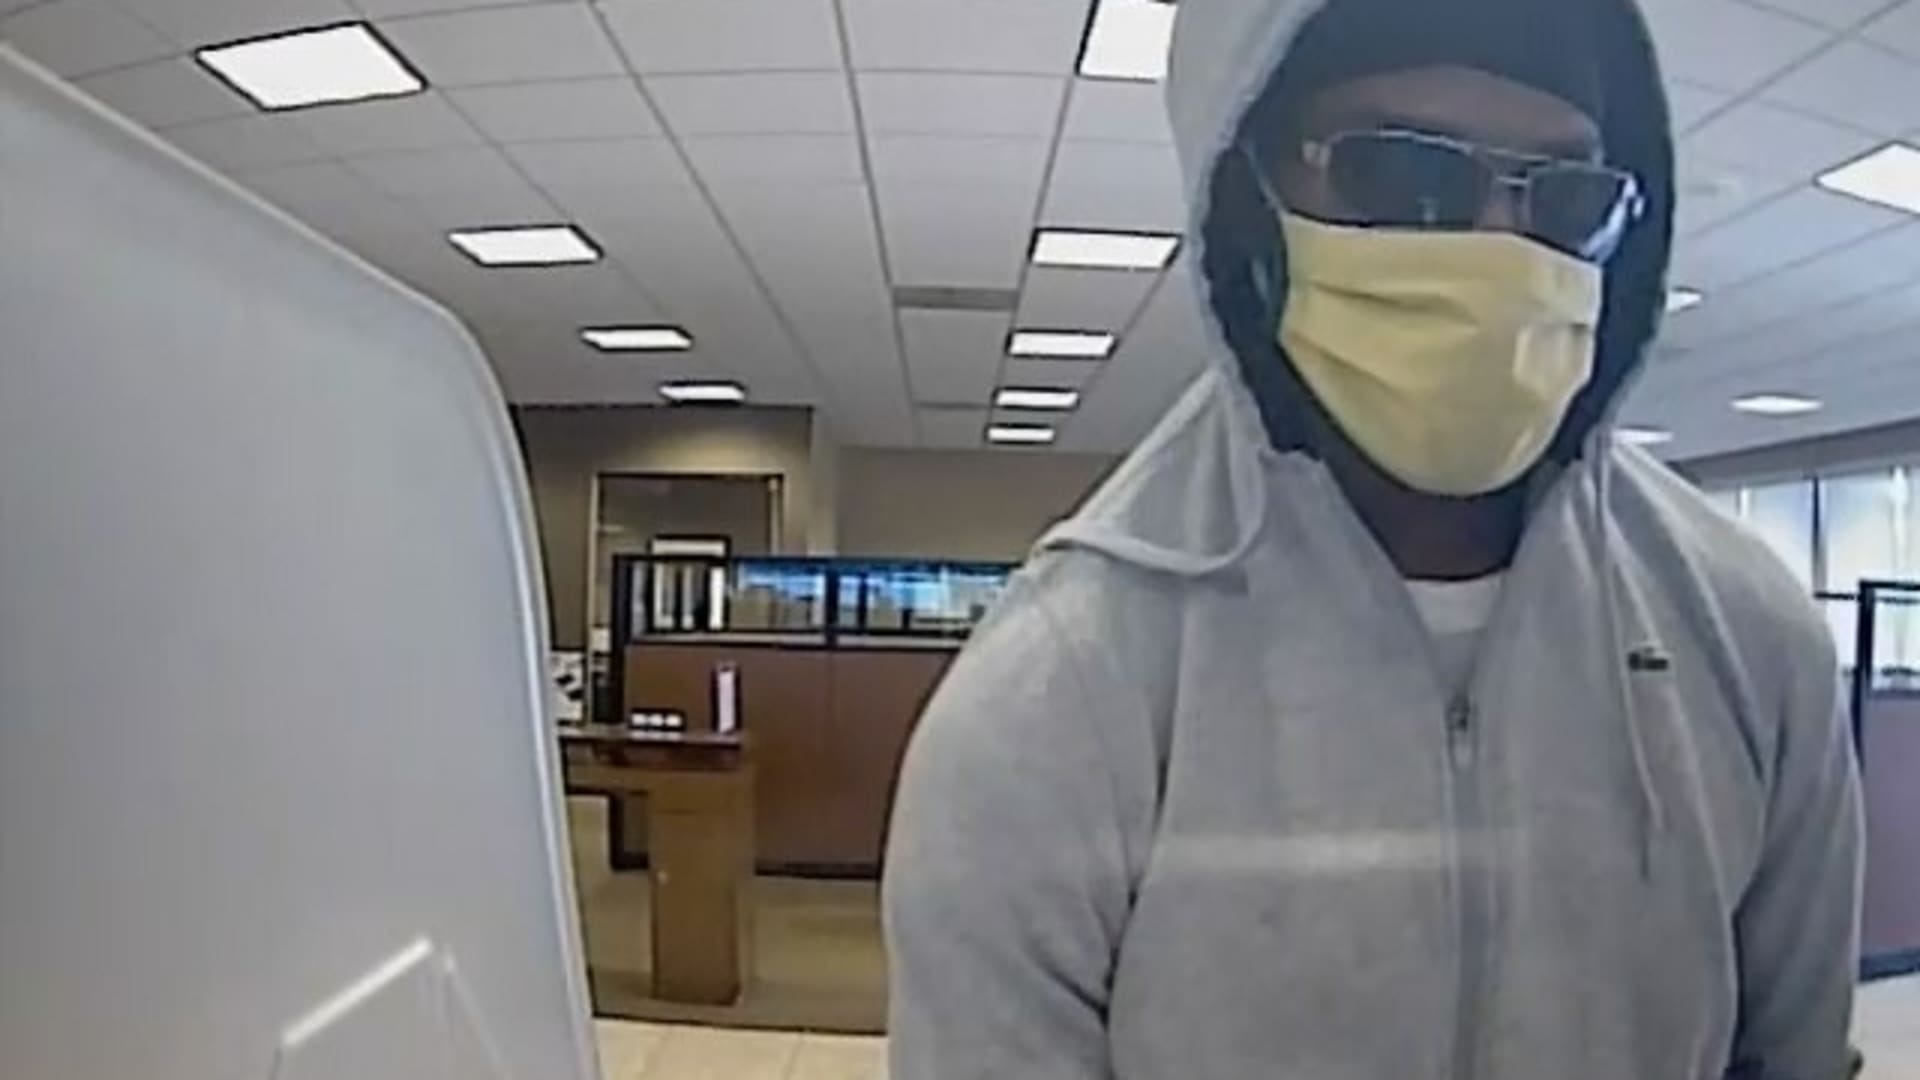 Suspected fraudster inside a Chase bank in Boca Raton, Florida.